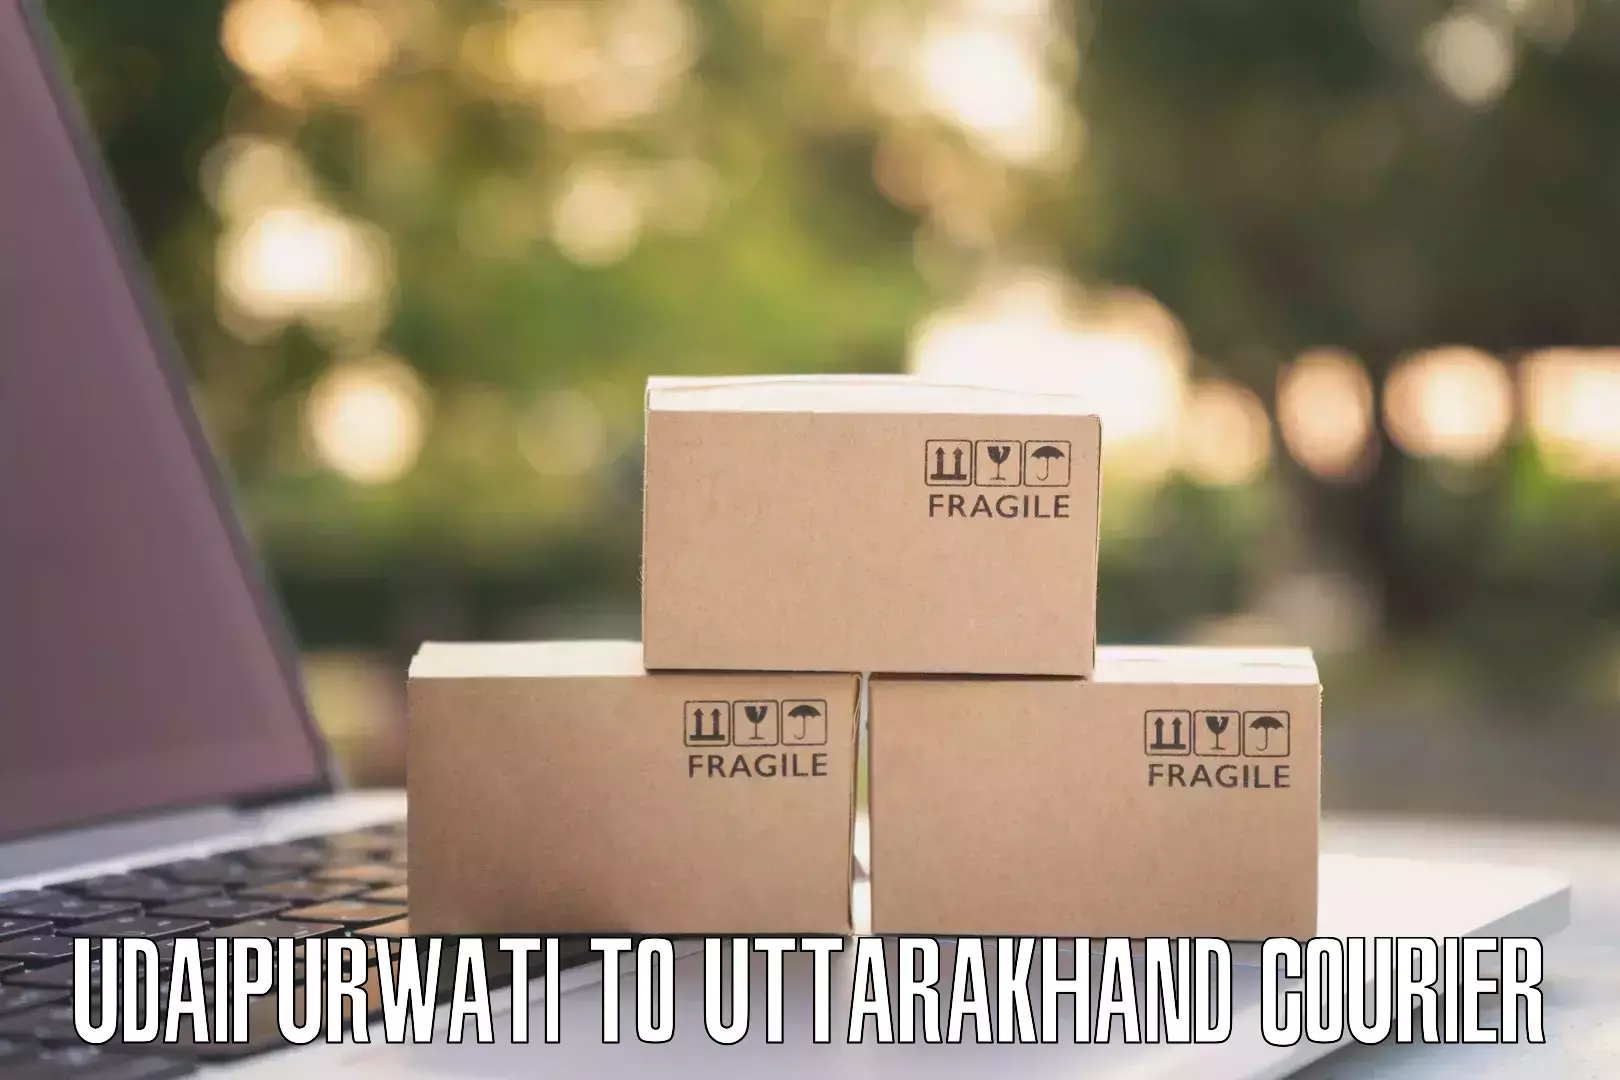 Automated parcel services Udaipurwati to Rishikesh